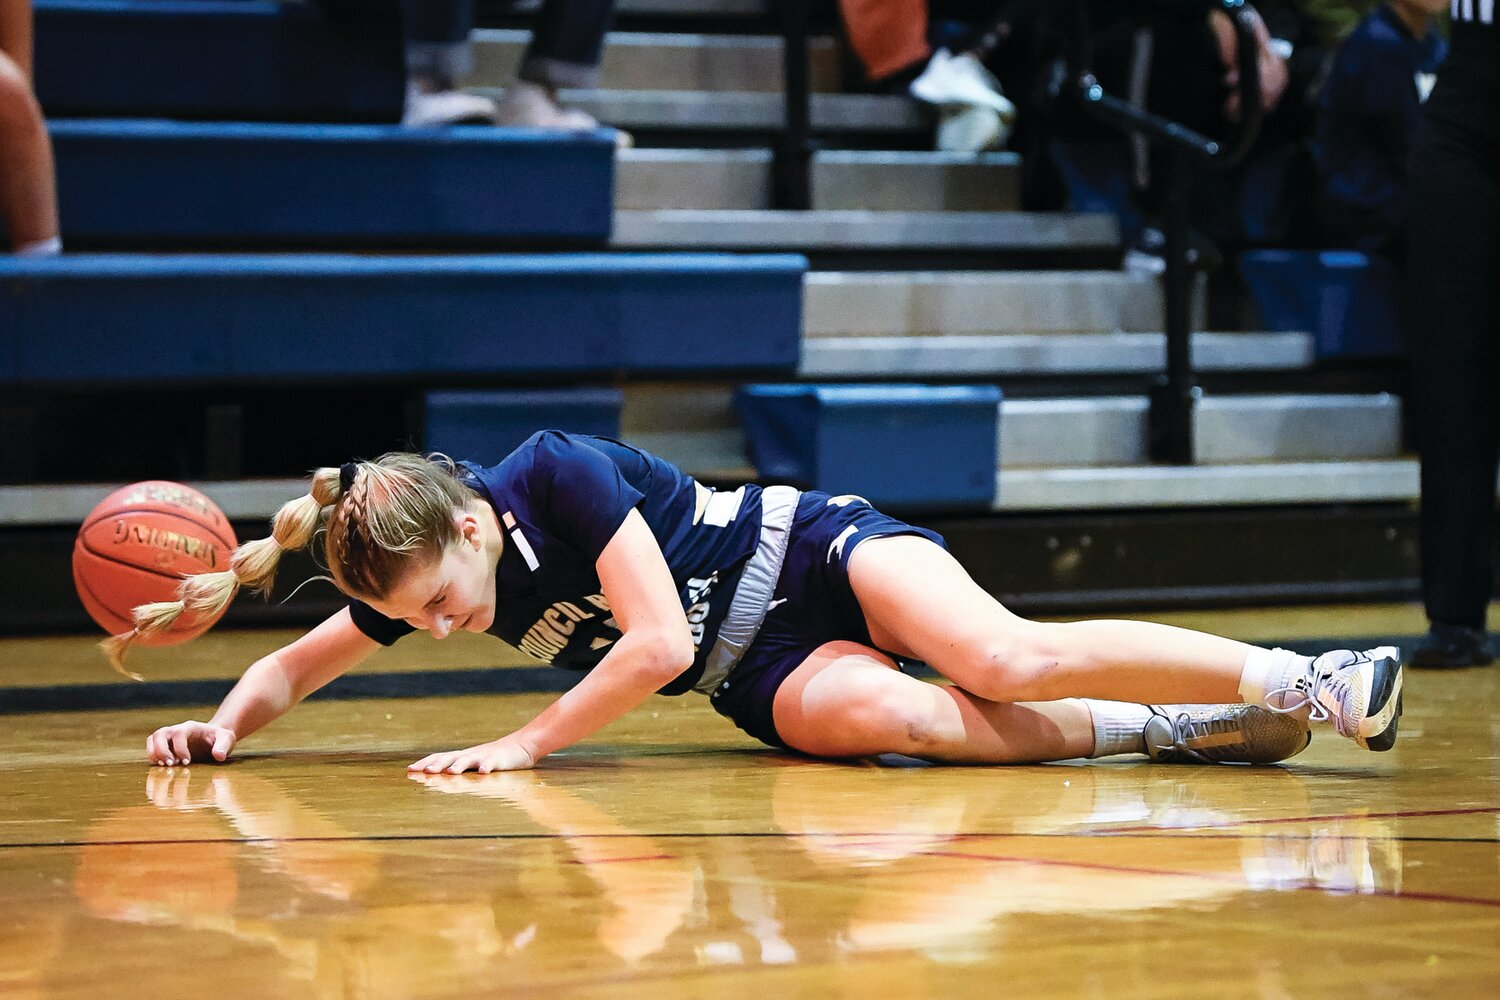 Council Rock South’s Kathryn O’Kane comes up a bit short while diving for a loose ball.